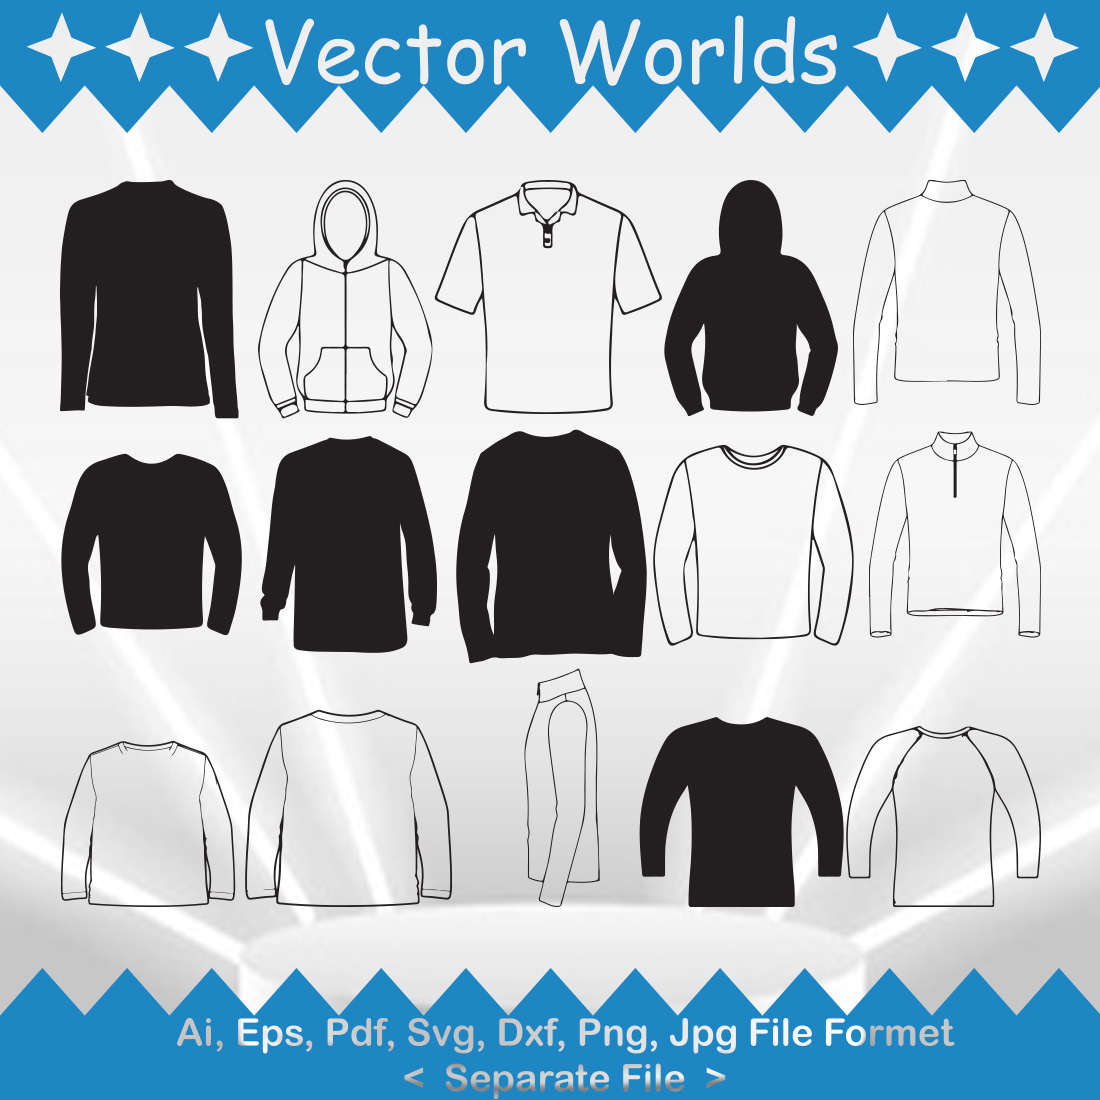 Collection of vector irresistible images of silhouettes of long sleeve shirts.